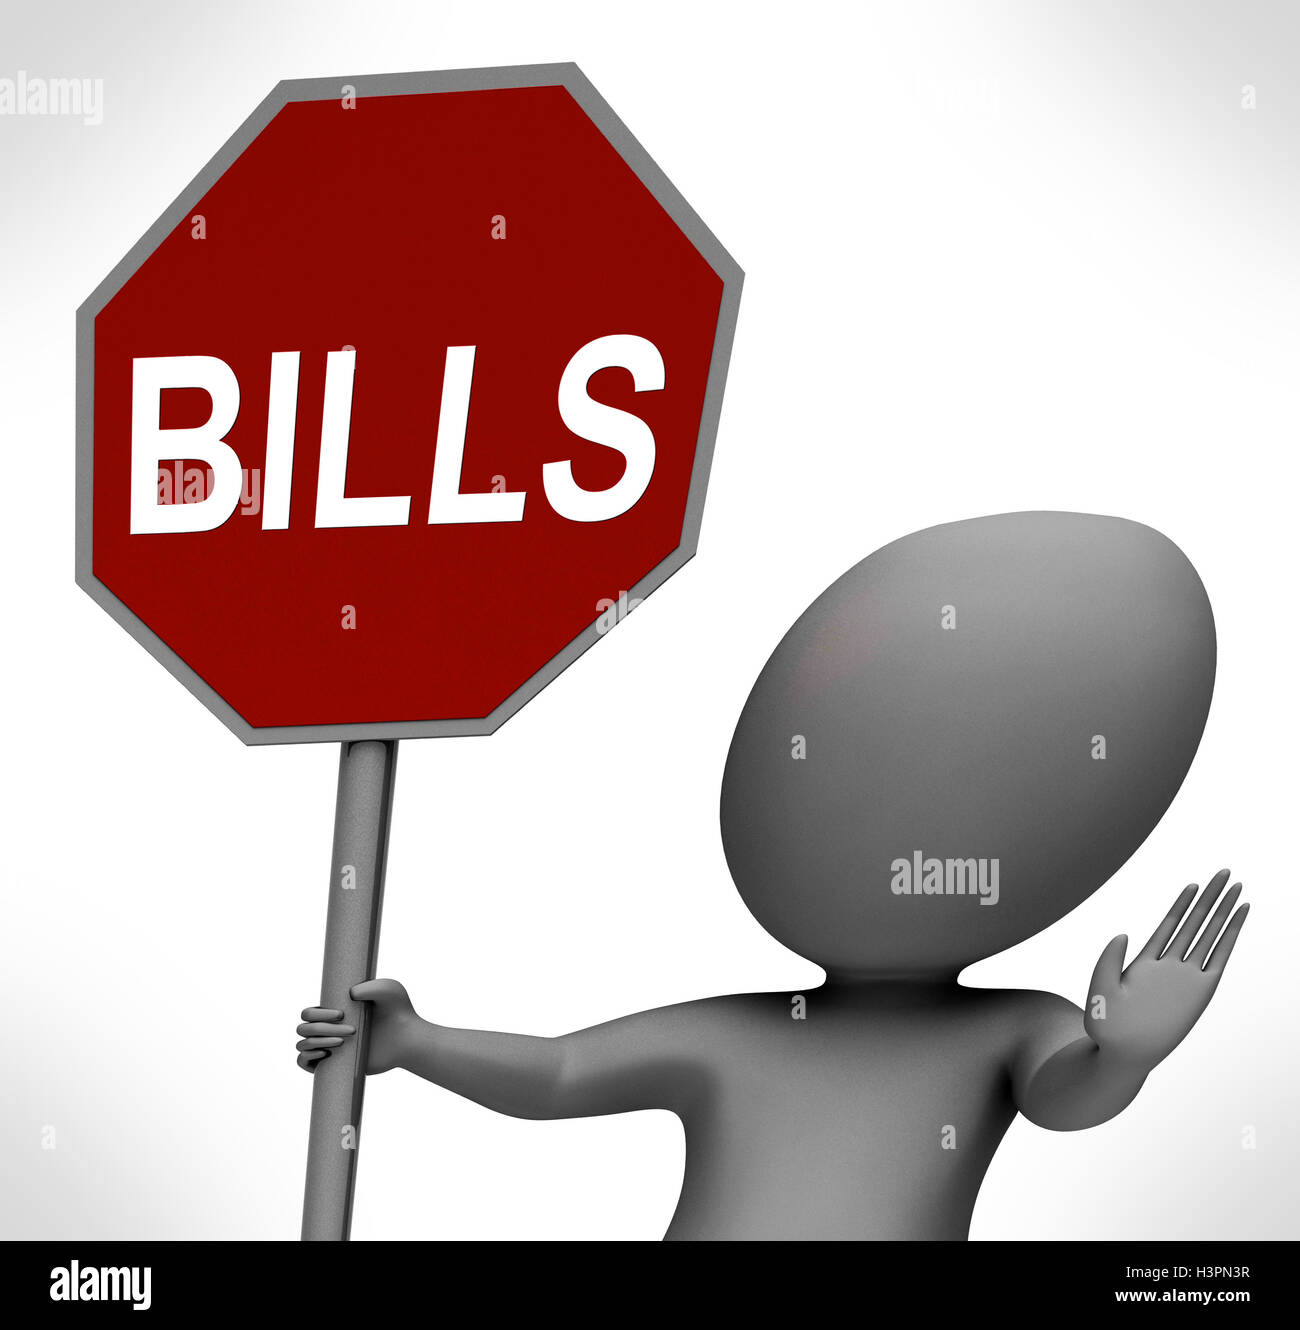 Bills Red Stop Sign Means Stopping Bill Payment Due Stock Photo